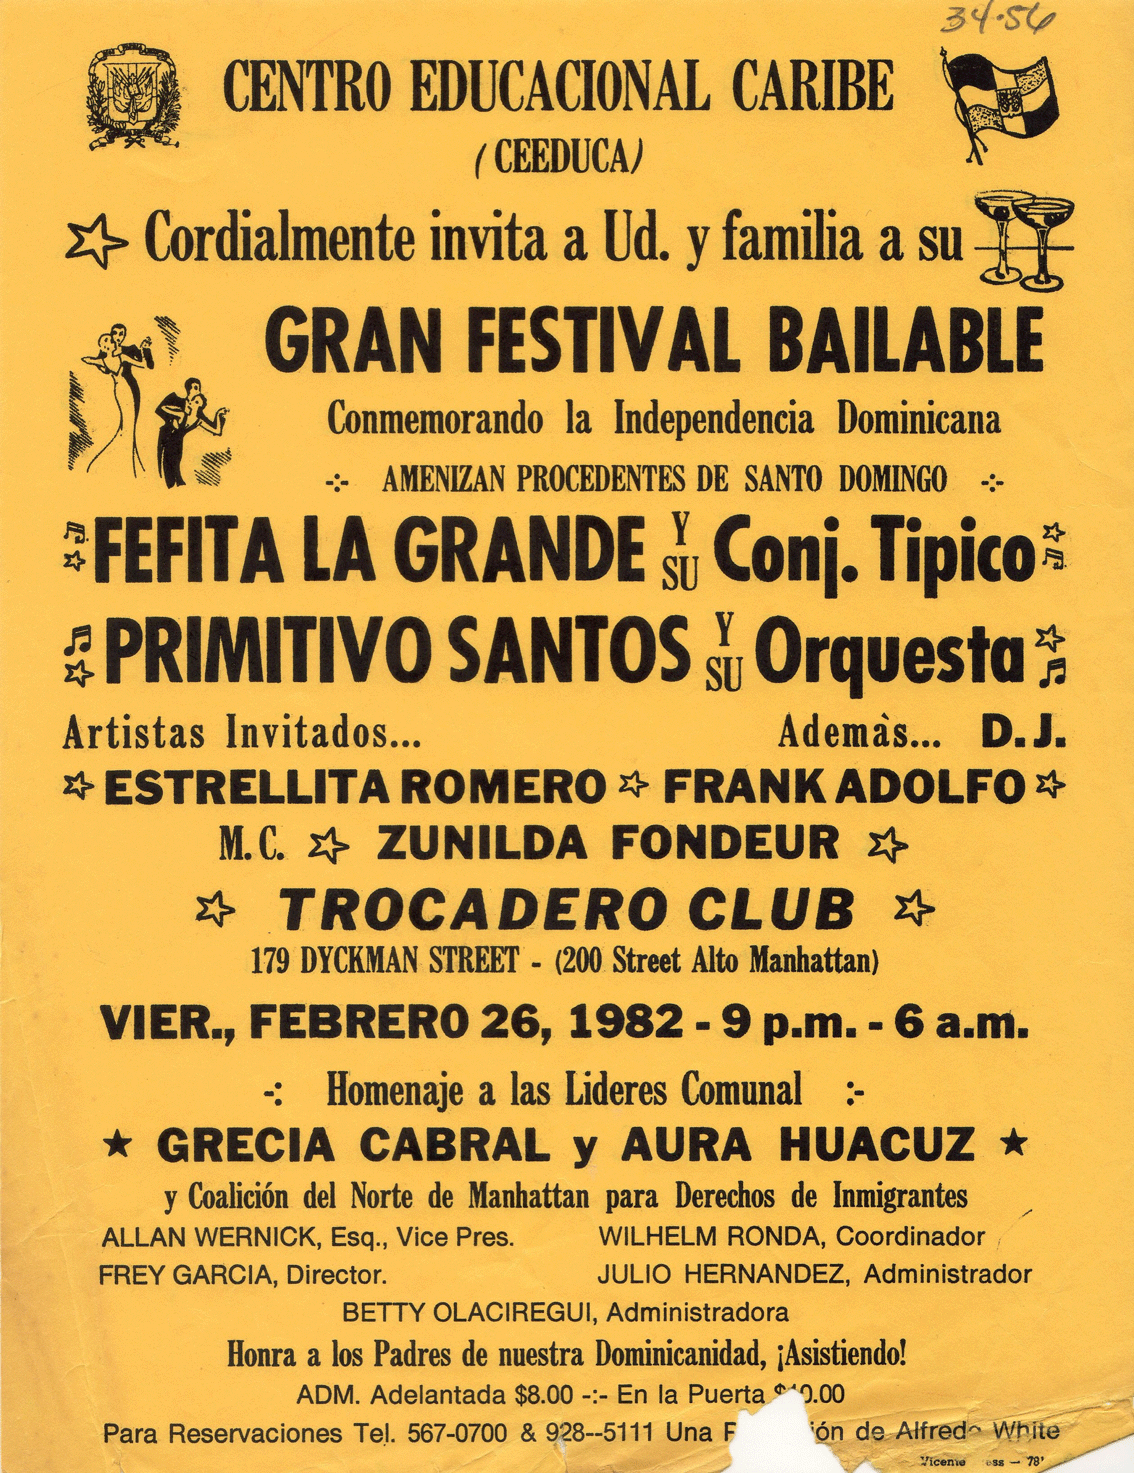 Grand Dancing Festival in honor of the Dominican Independence Flyer, February 26, 1982